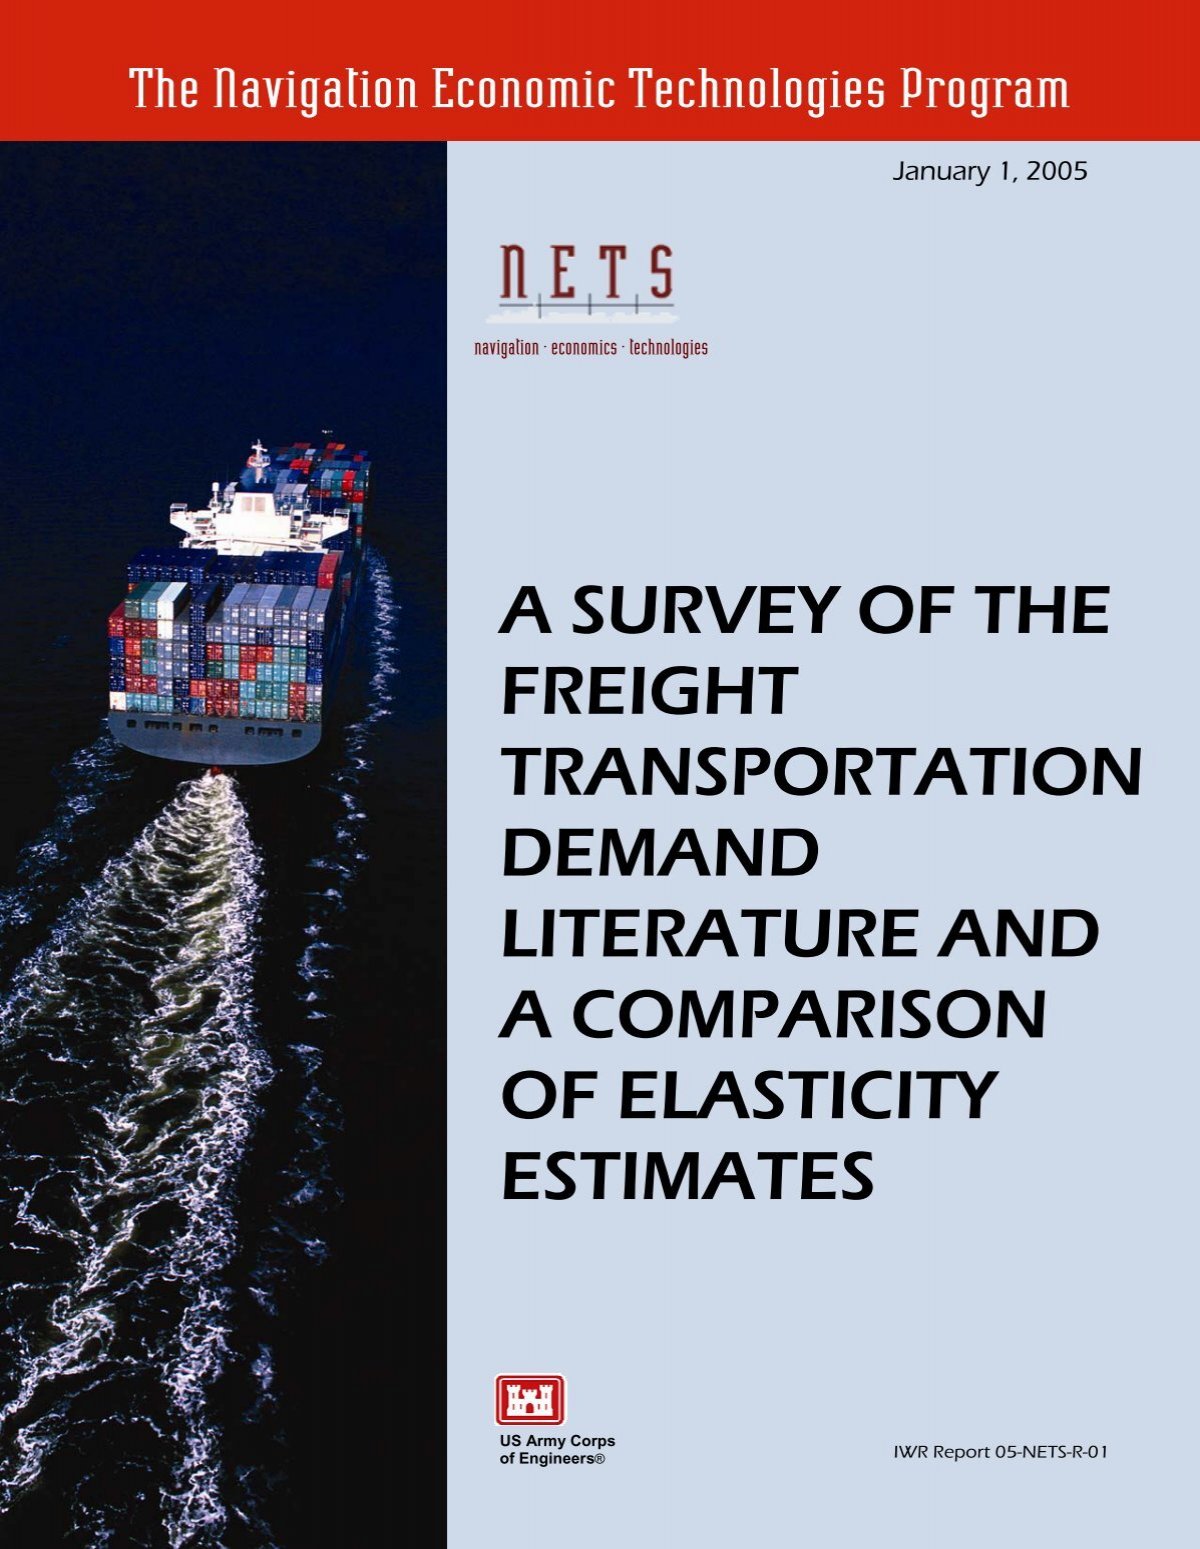 literature review on freight transportation